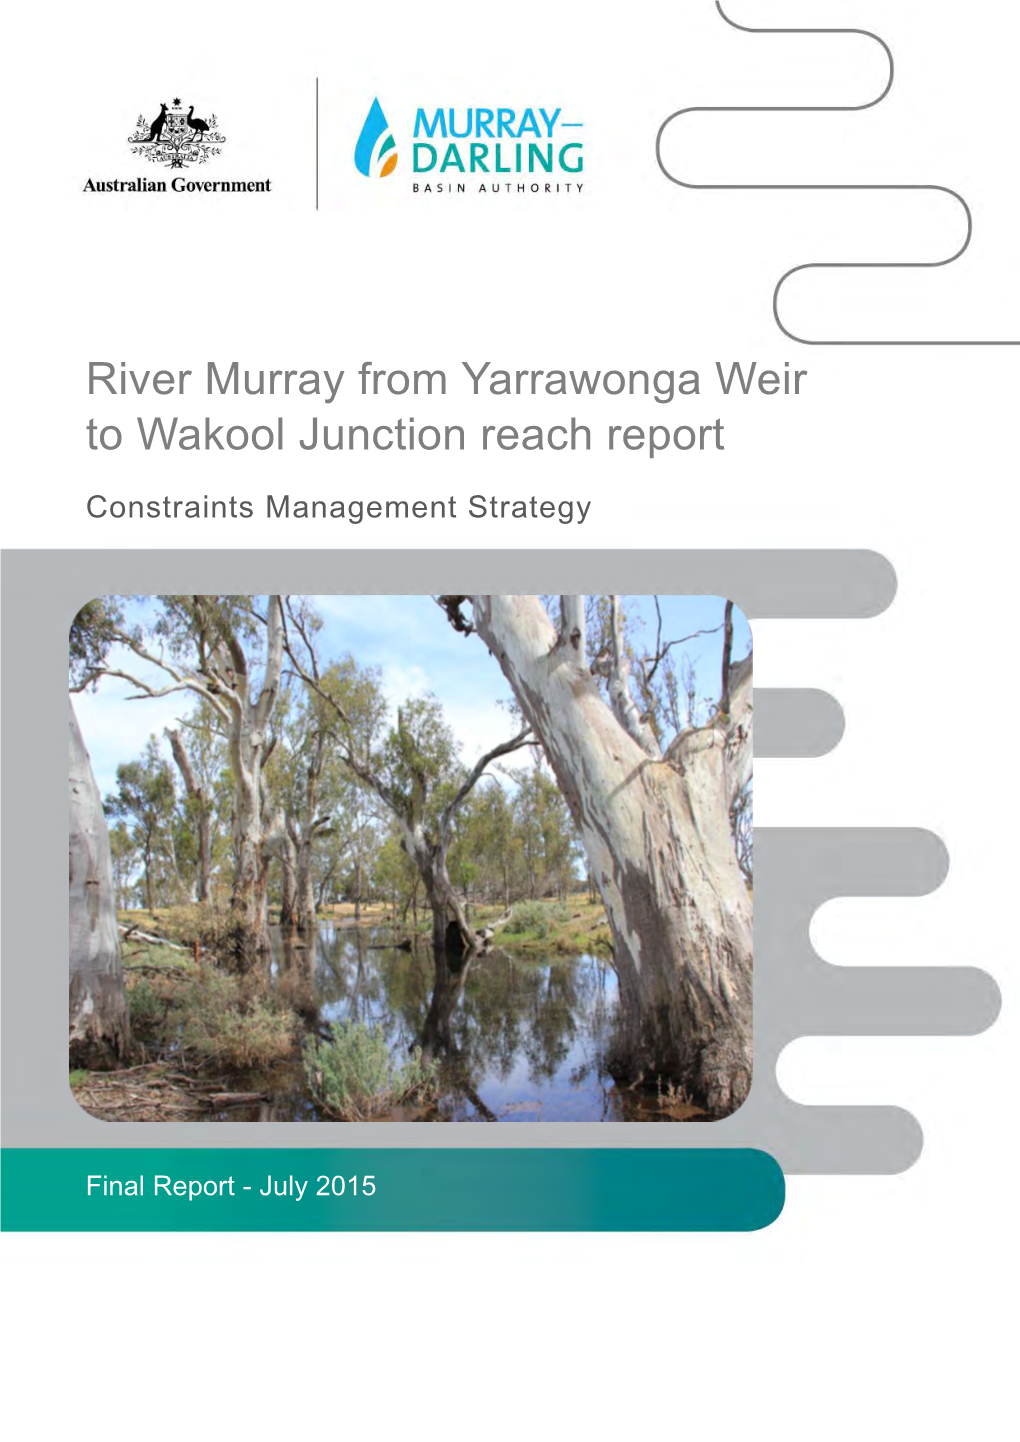 River Murray from Yarrawonga Weir to Wakool Junction Reach Report